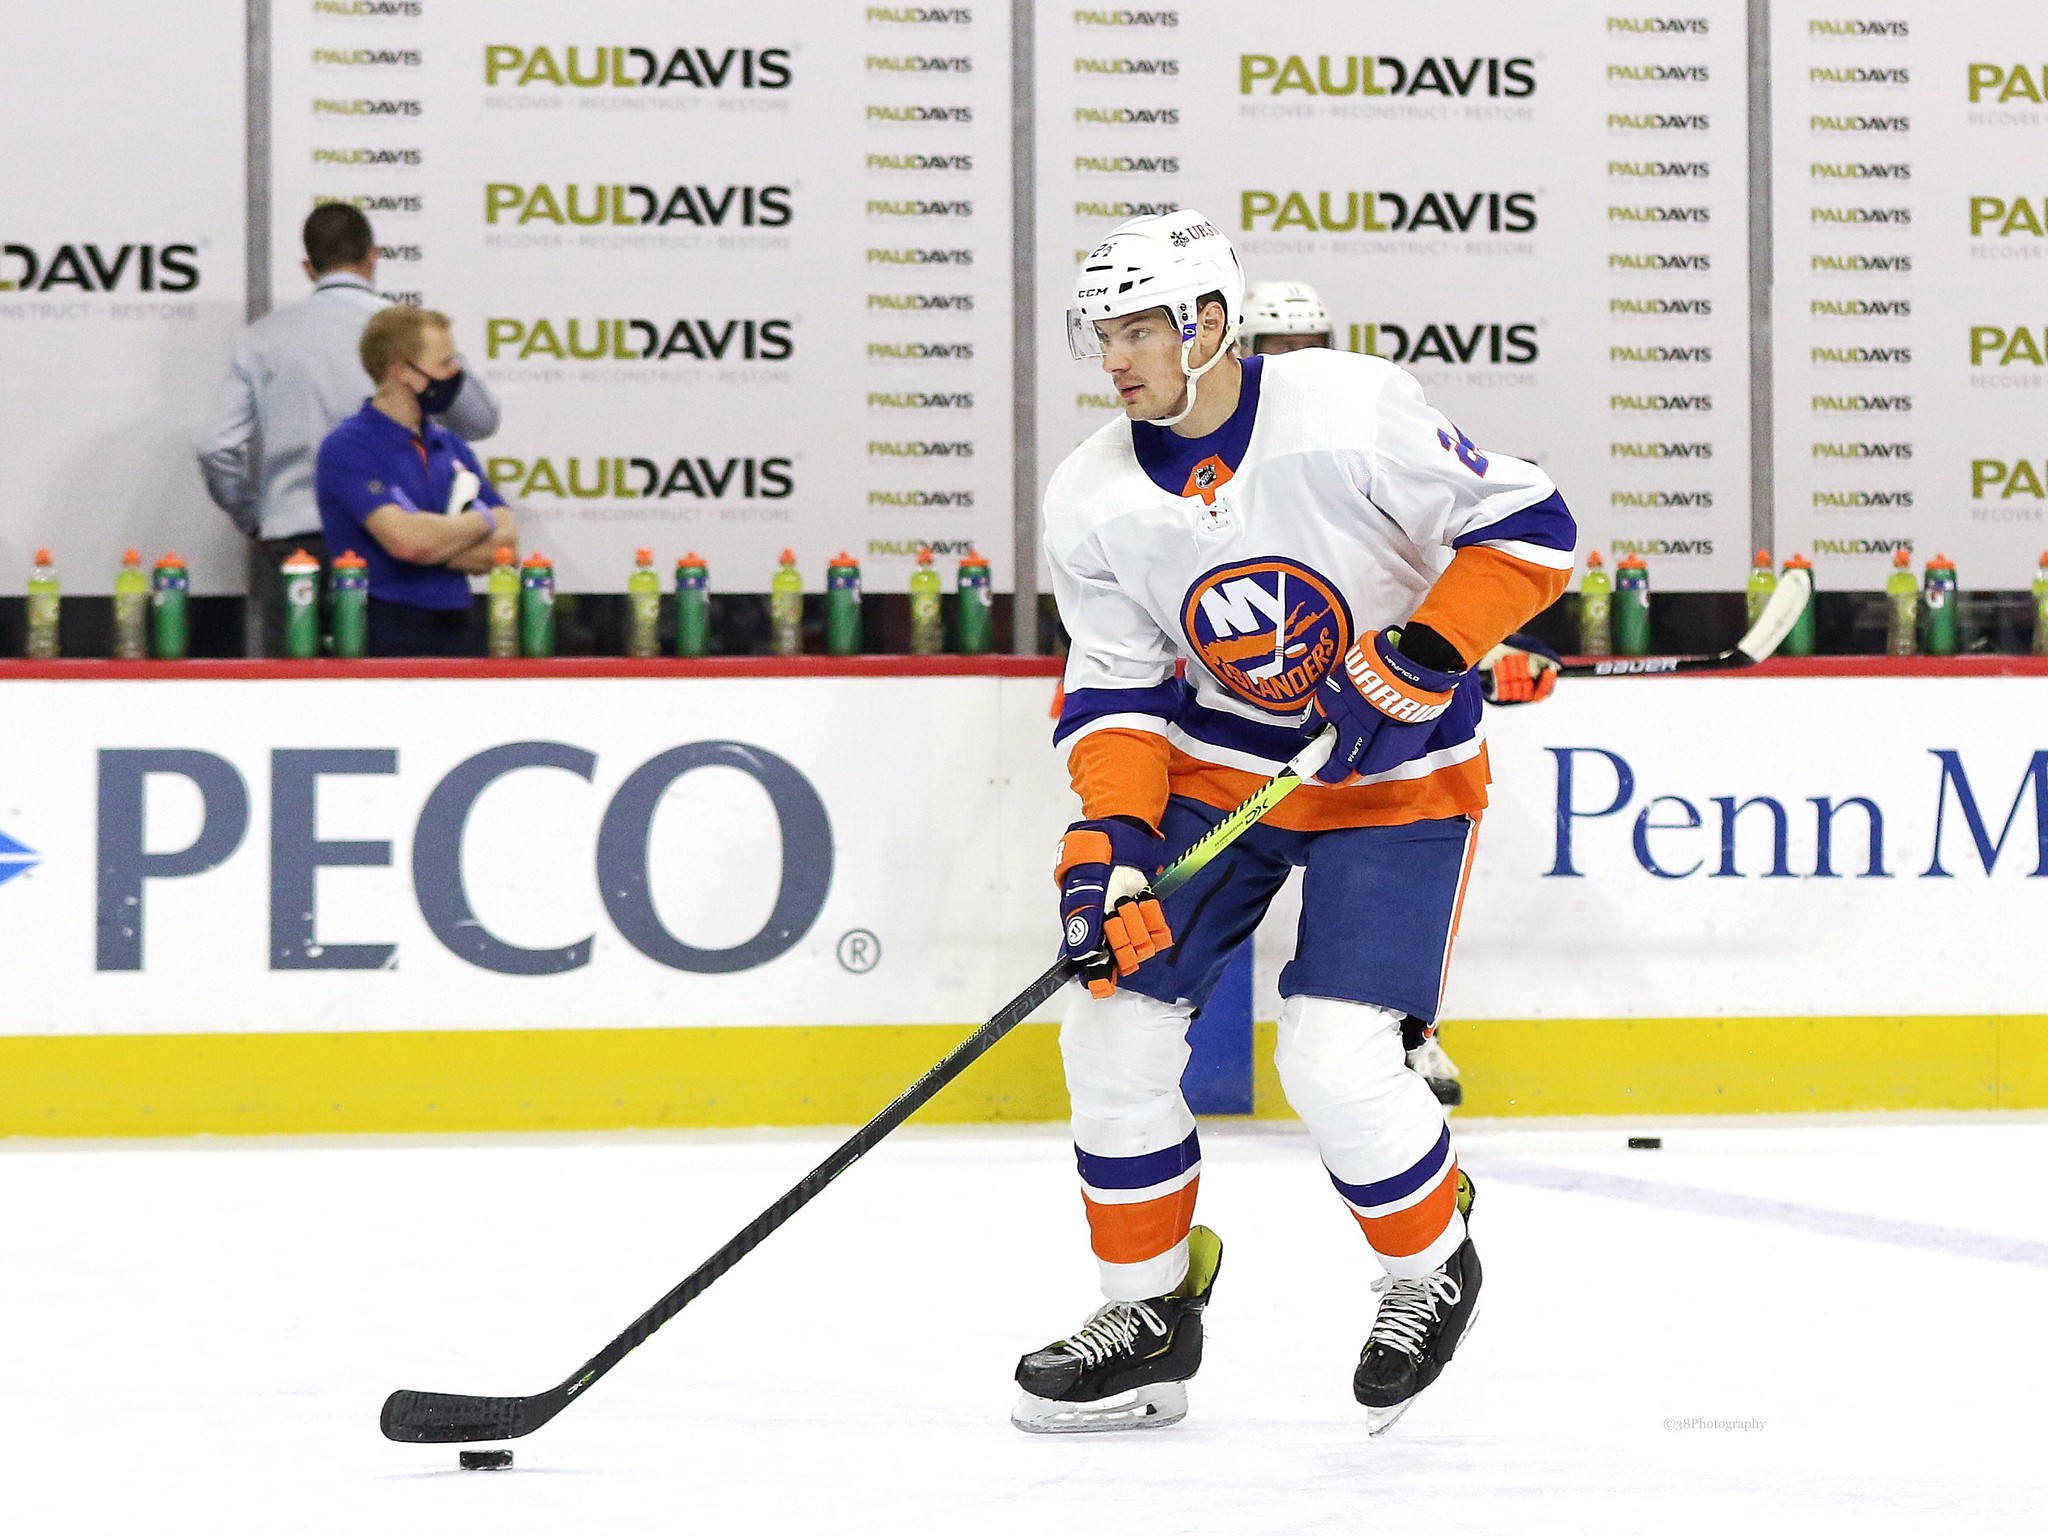 Scott Mayfield gets contract extension from Islanders - Sports Illustrated